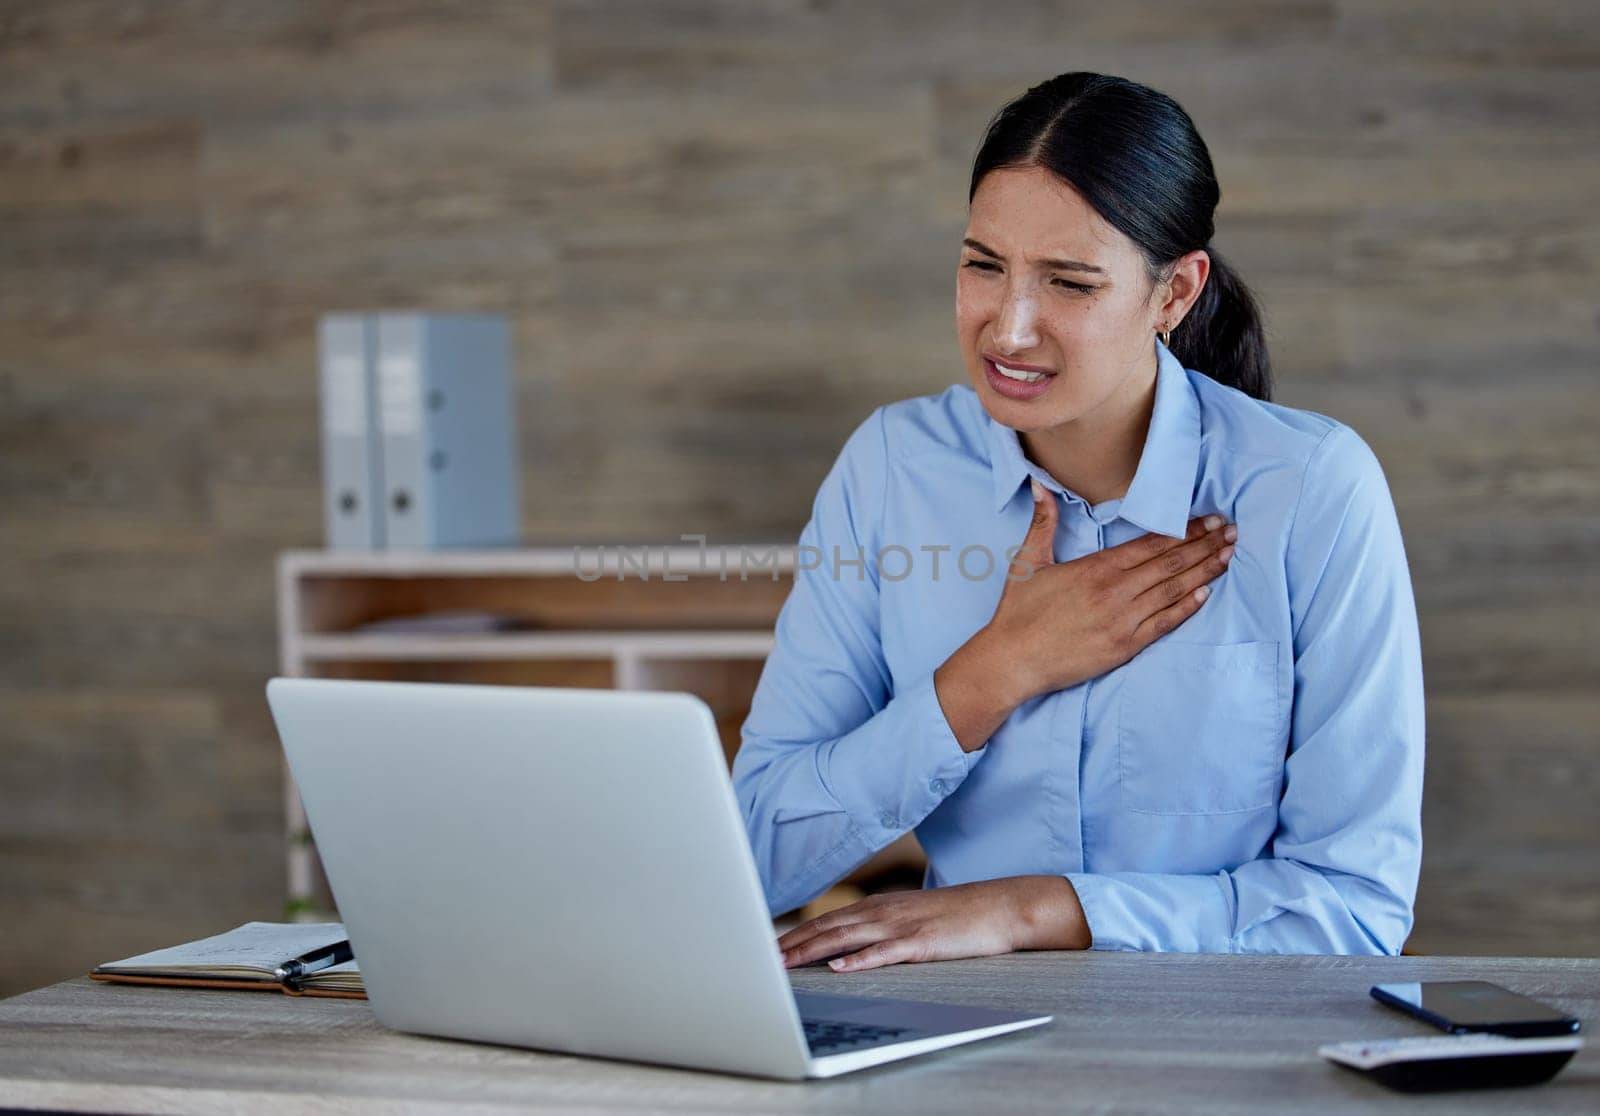 Stress, laptop and woman in office with chest pain from bad news, email or negative business review or feedback. Computer, anxiety or accountant with heartburn disaster from tax, audit or bankruptcy.